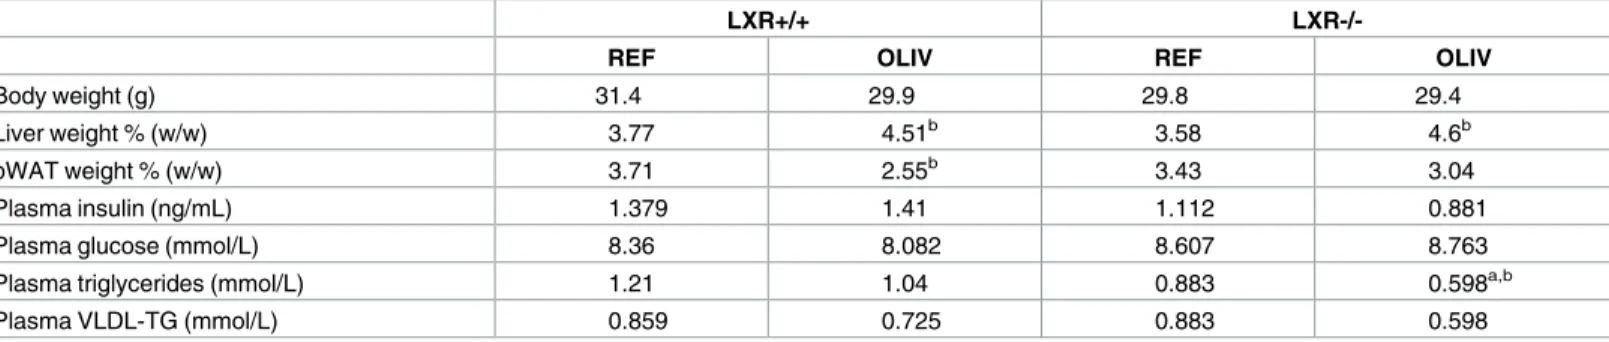 Table 2. Effects of an oleic acid-rich diet on body, liver, adipose tissue weights, and on plasma parameters in LXR+/+ and LXR-/- mice.